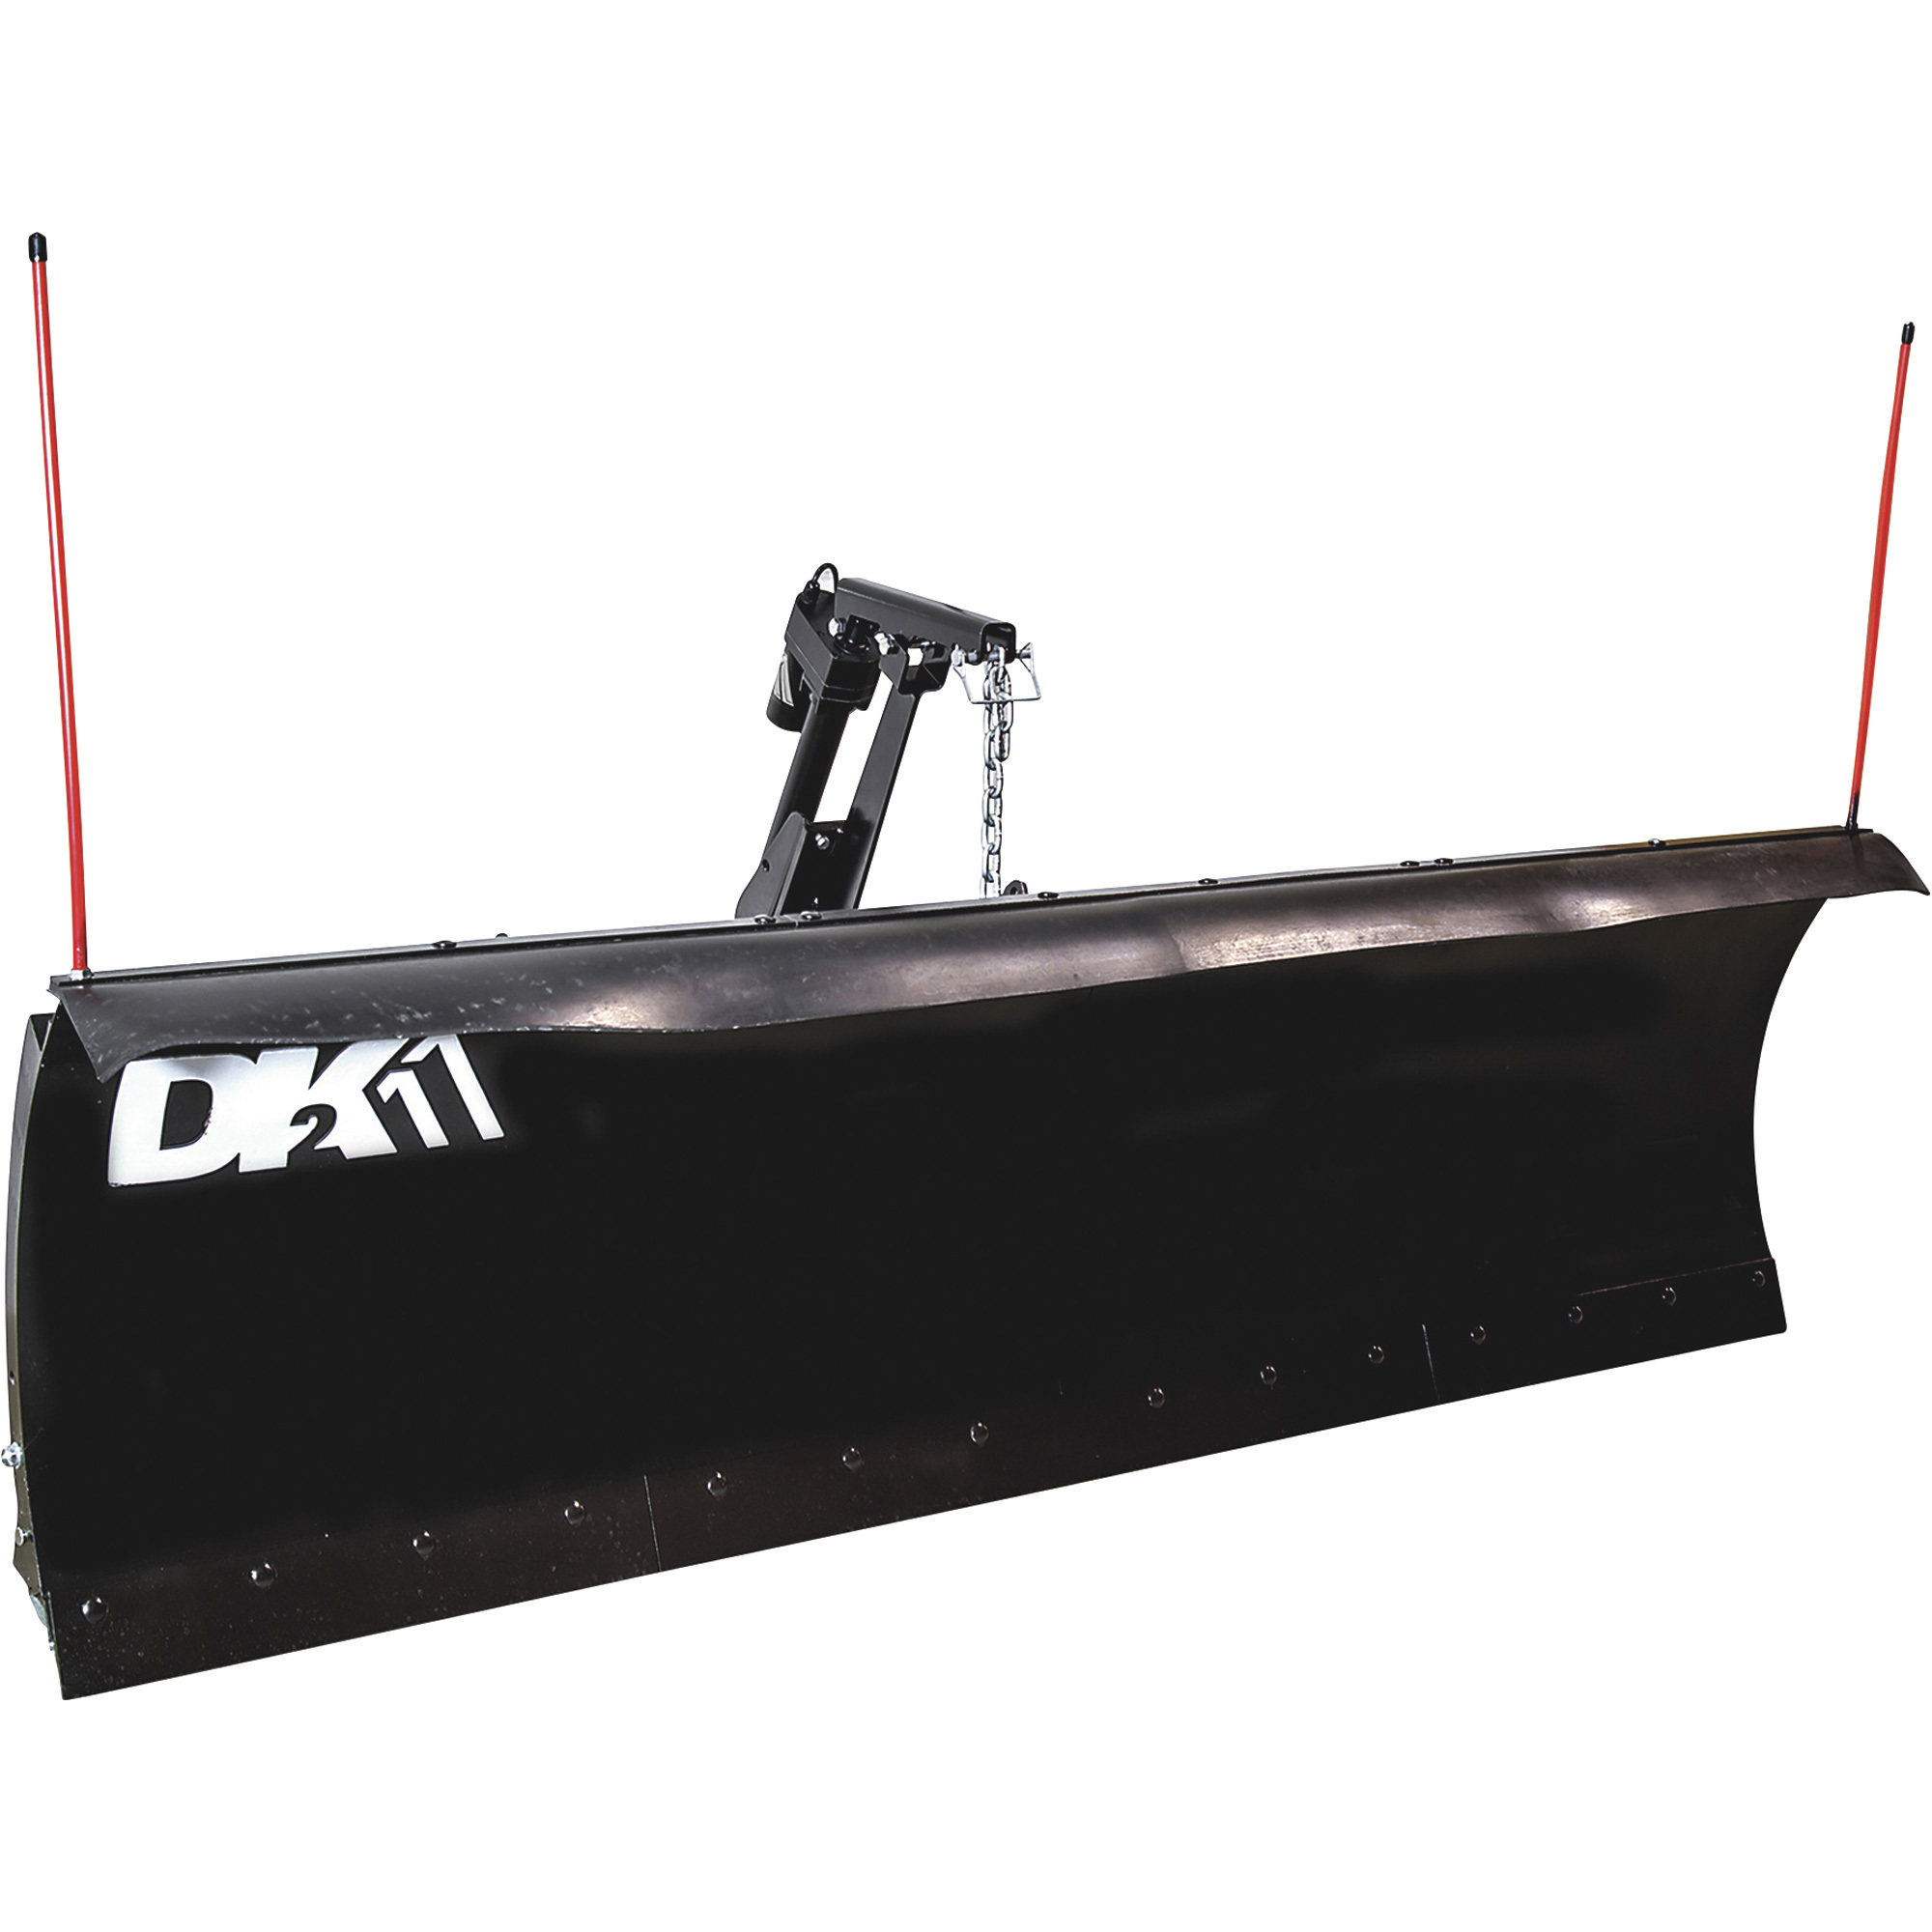 Elite T-Frame Snow Plow Kit with Electric Actuator, 88Inch L x 26Inch H, Model AVAL8826ELT